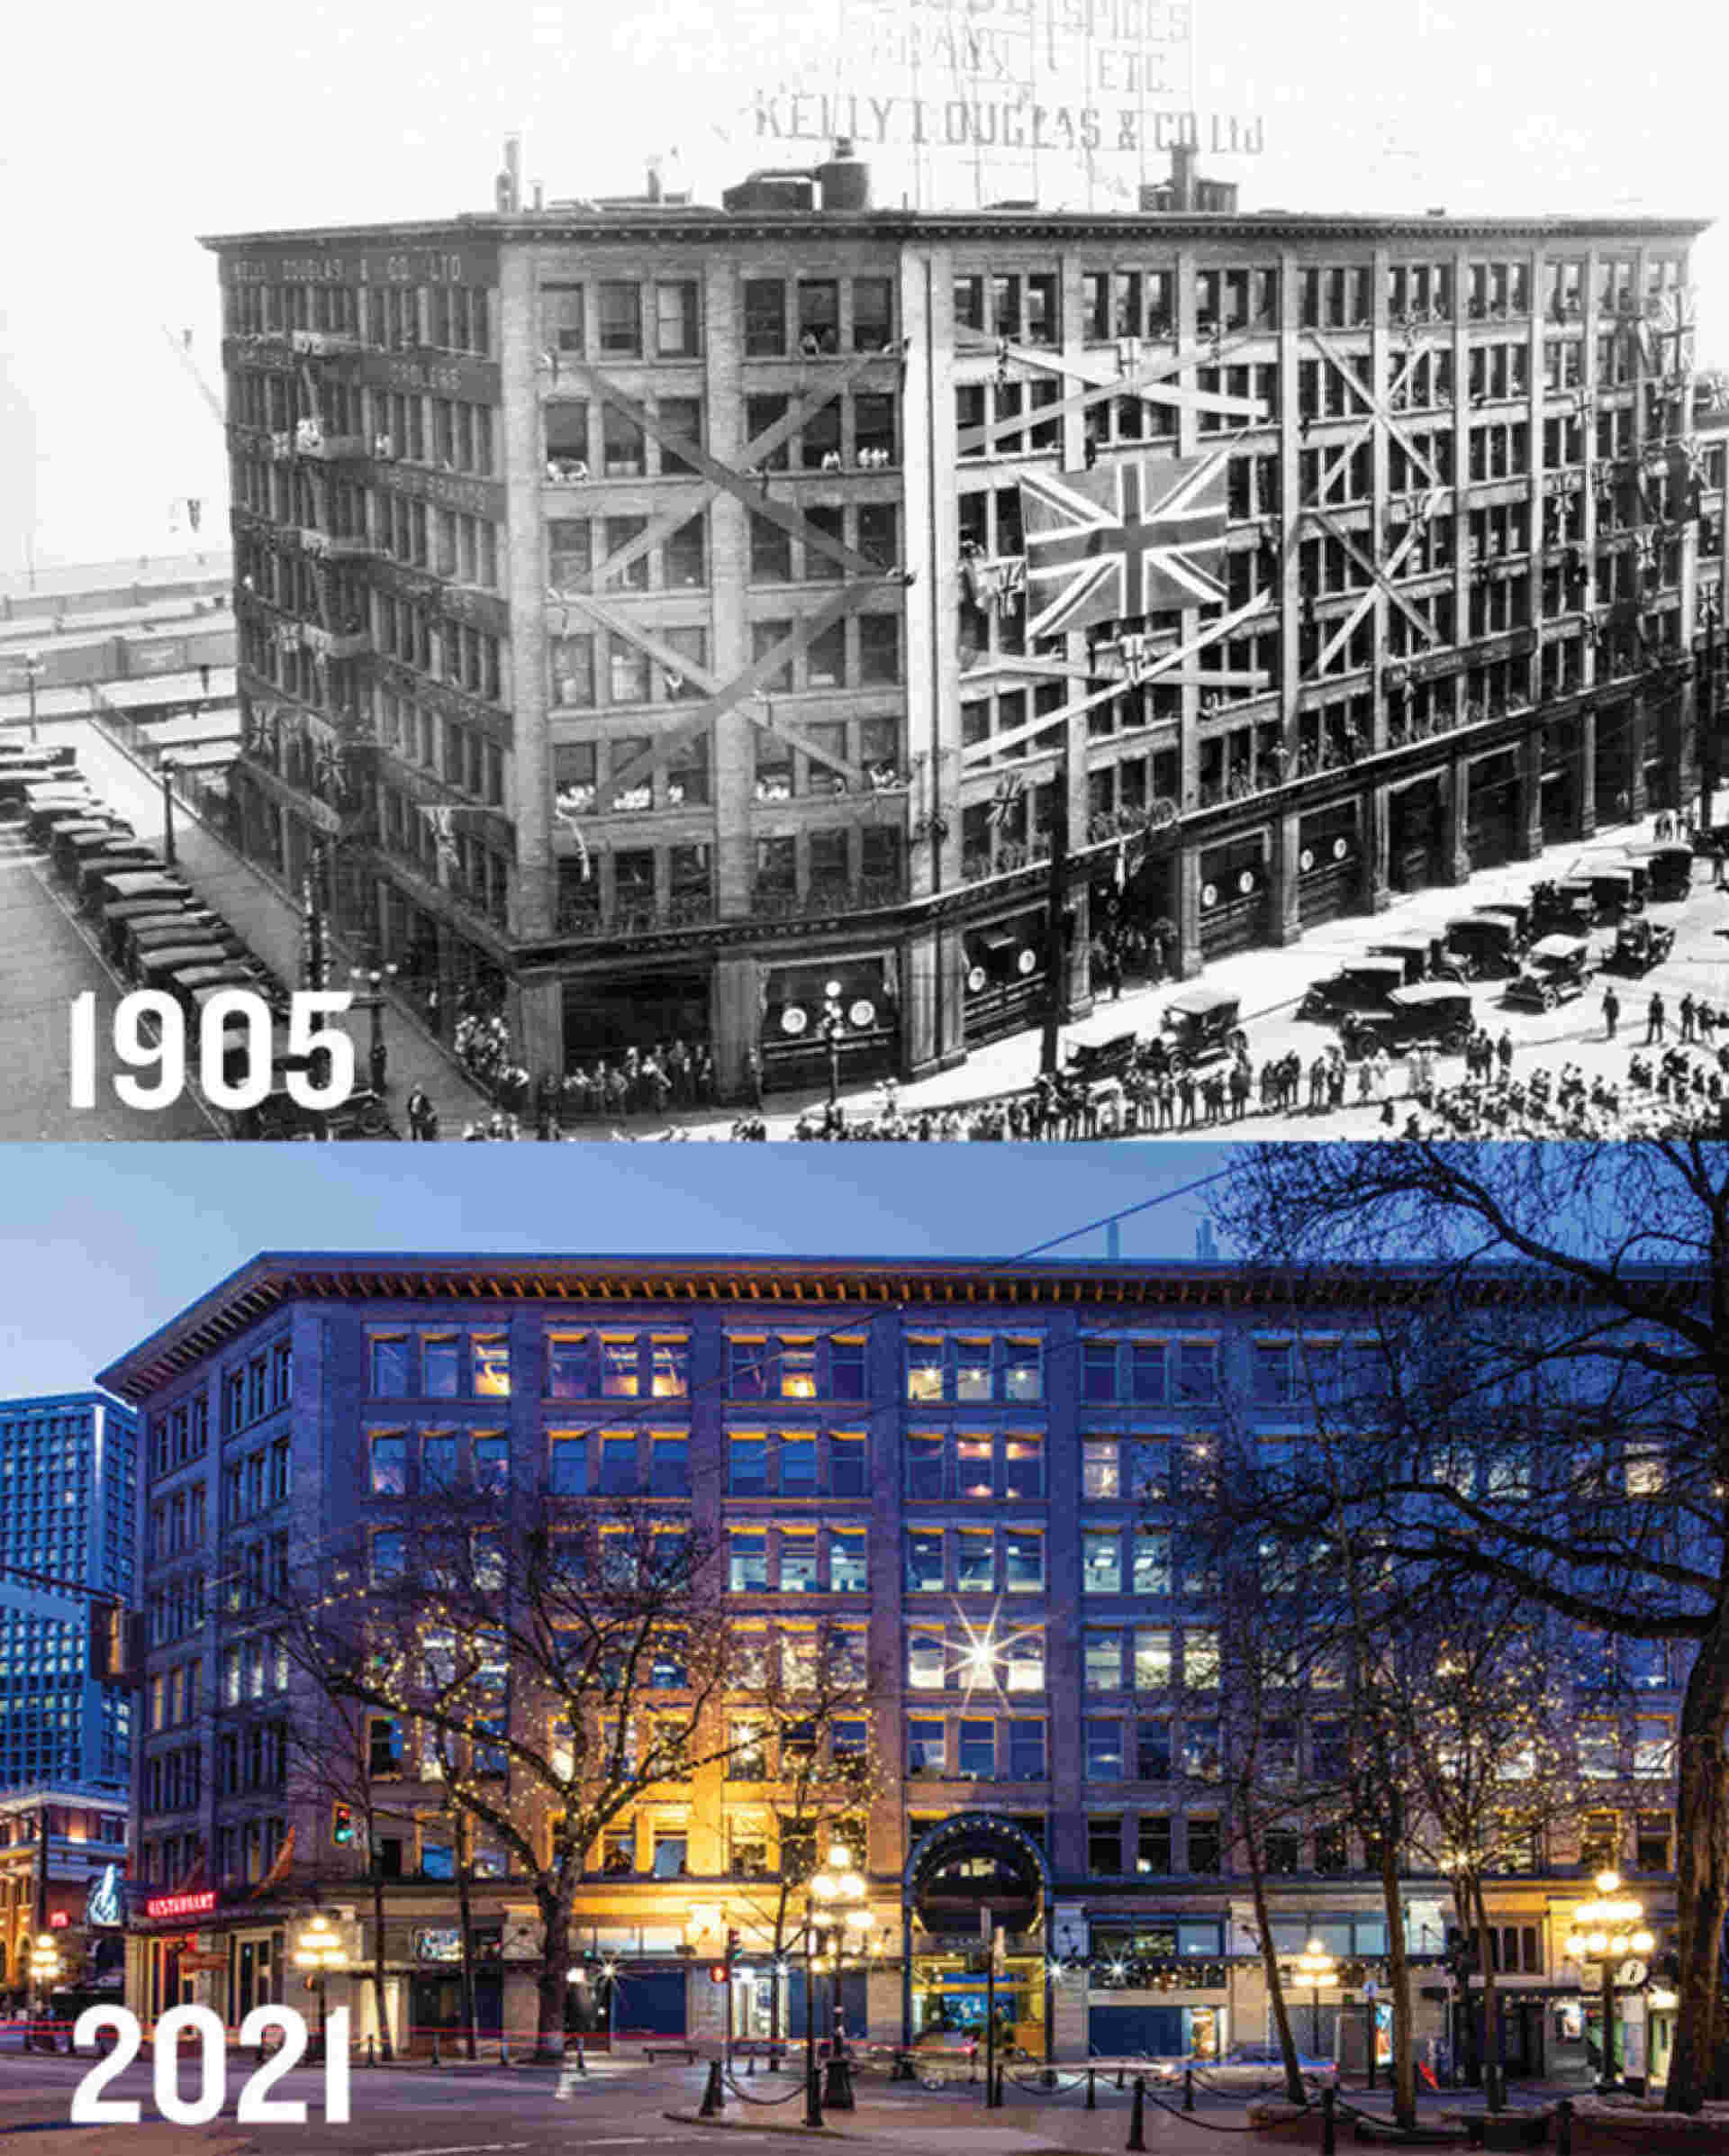 A Vancouver Staple - kelly-douglas-and-co-building-comparision